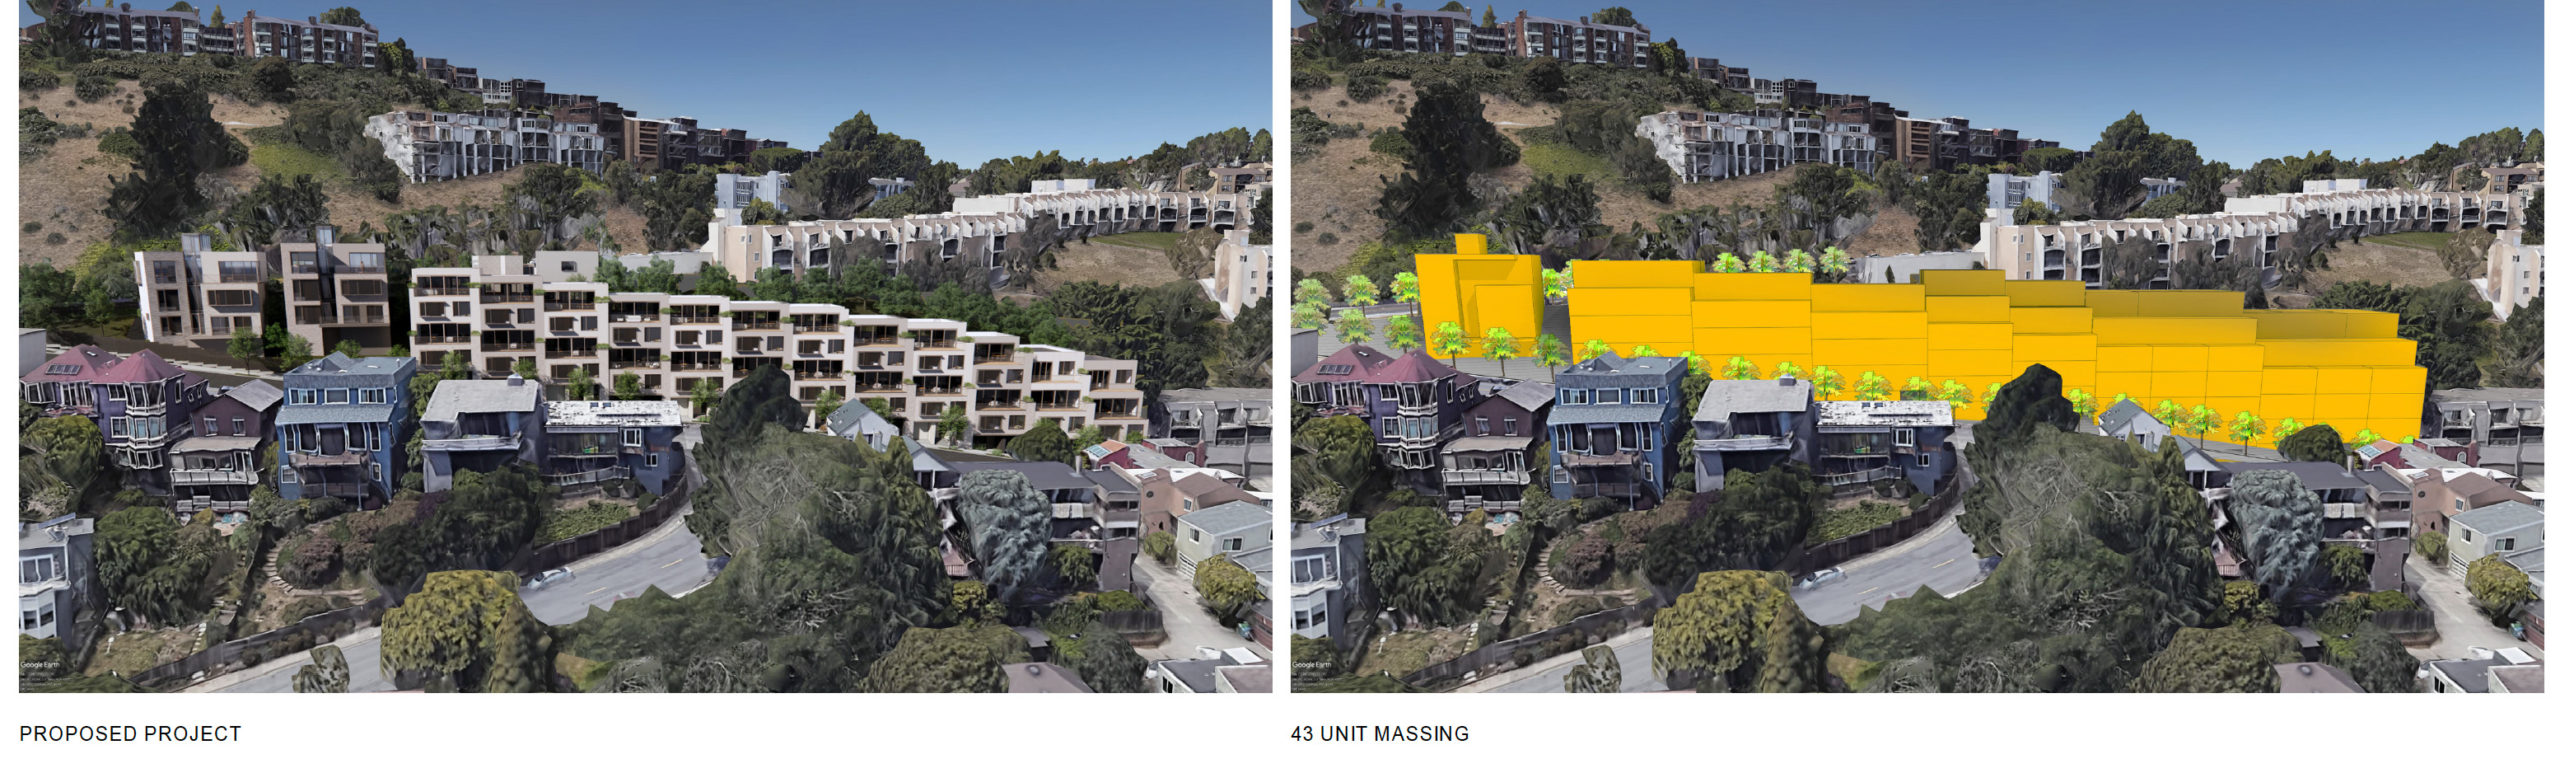 1900 Diamond Street aerial perspective side-by-side of the proposed project and a 43-unit massing suggested by City staff, rendering by Solomon Cordwell Buenz